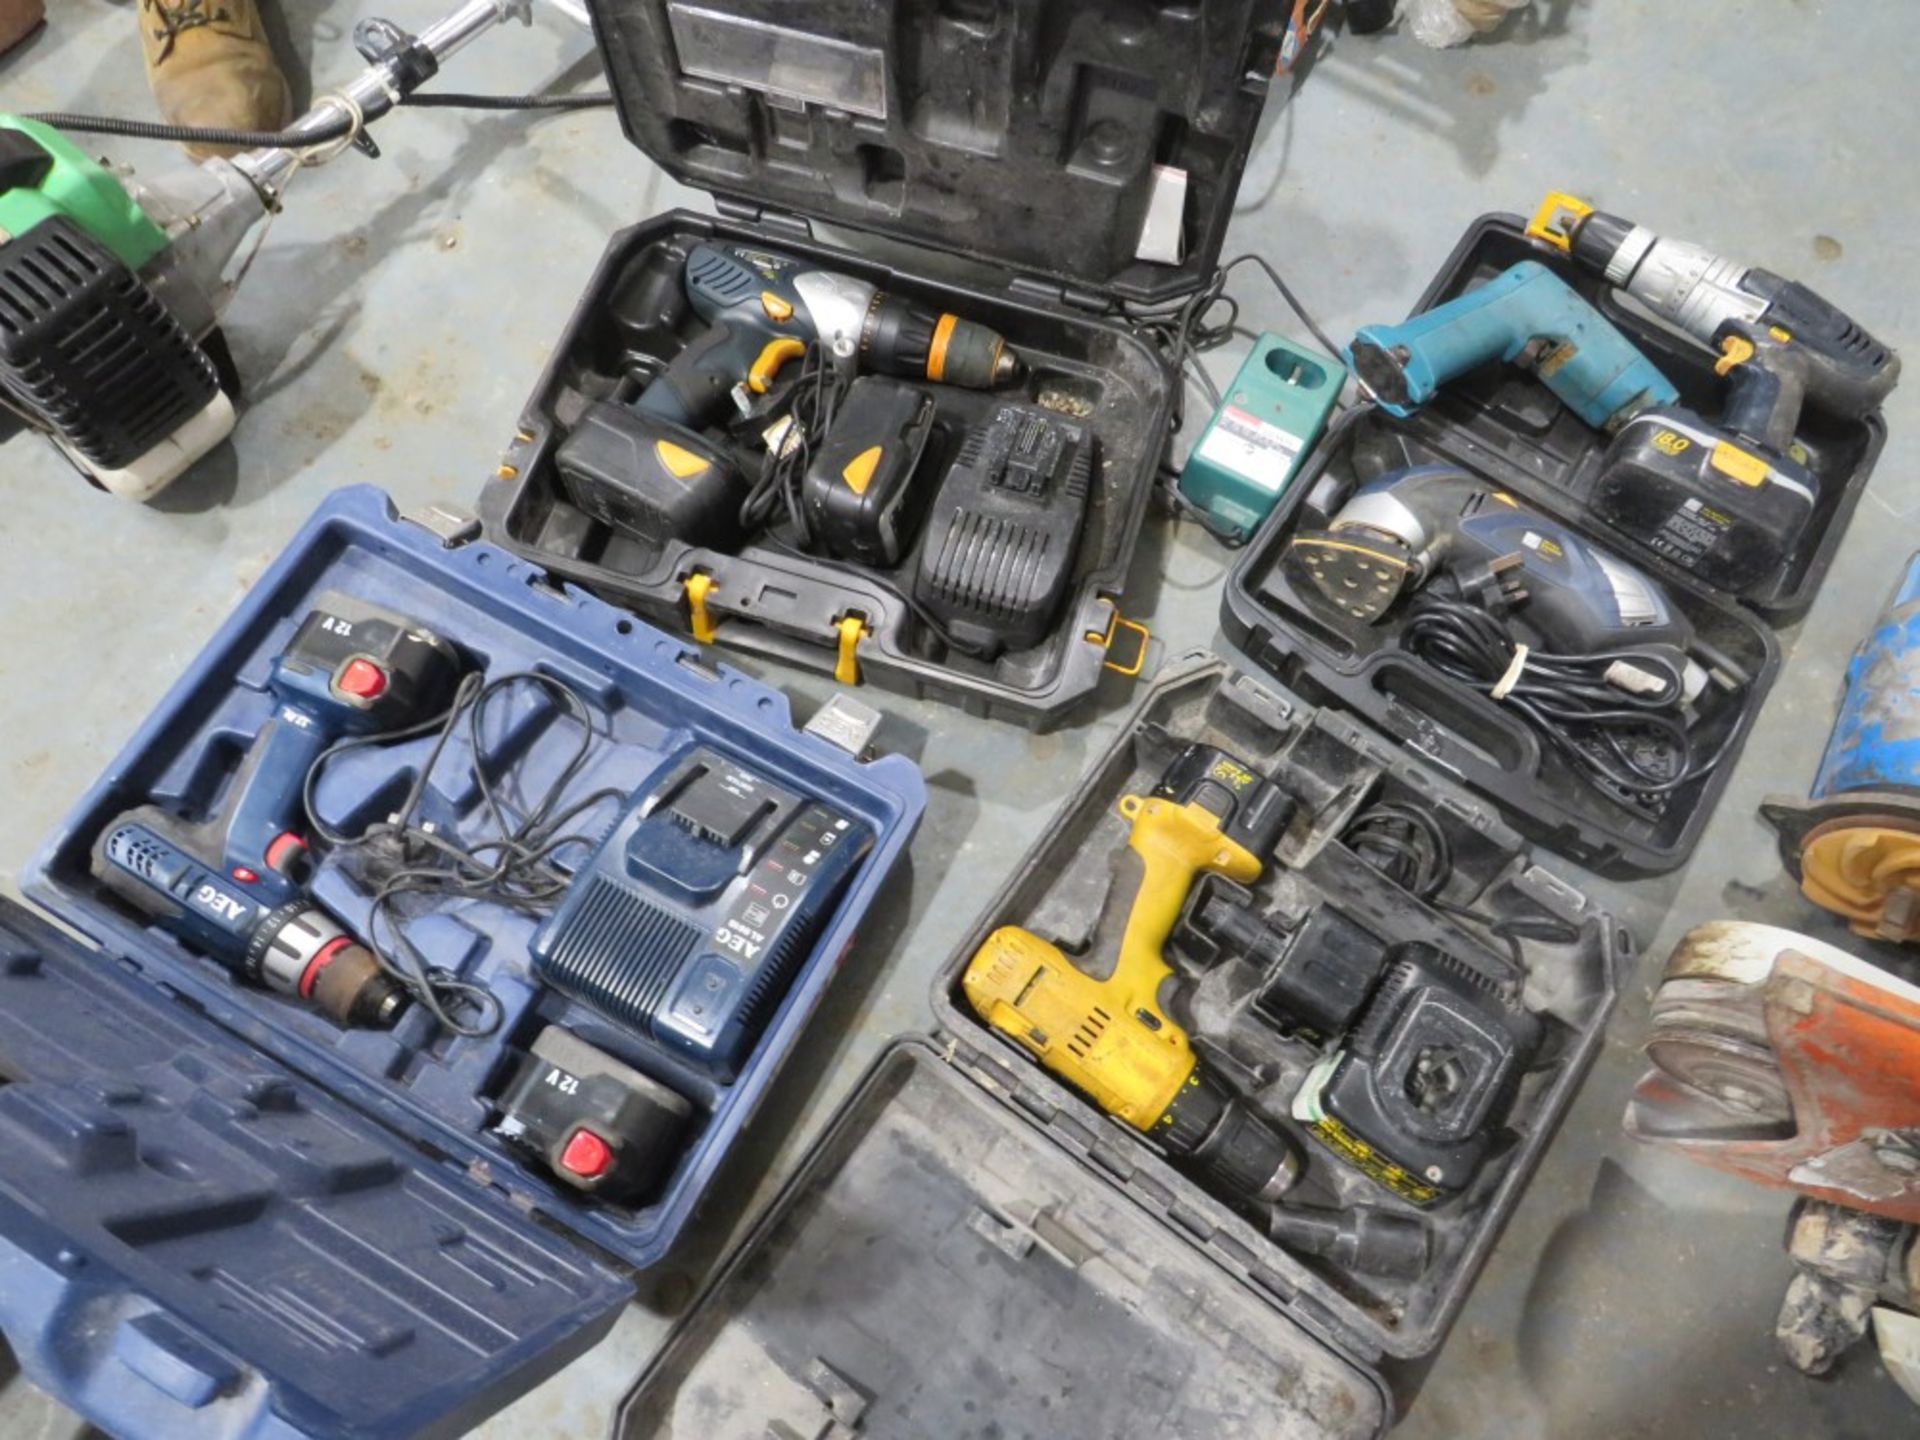 5 DRILLS (3 IN BOXES WITH CHARGERS) & SANDER [NO VAT]